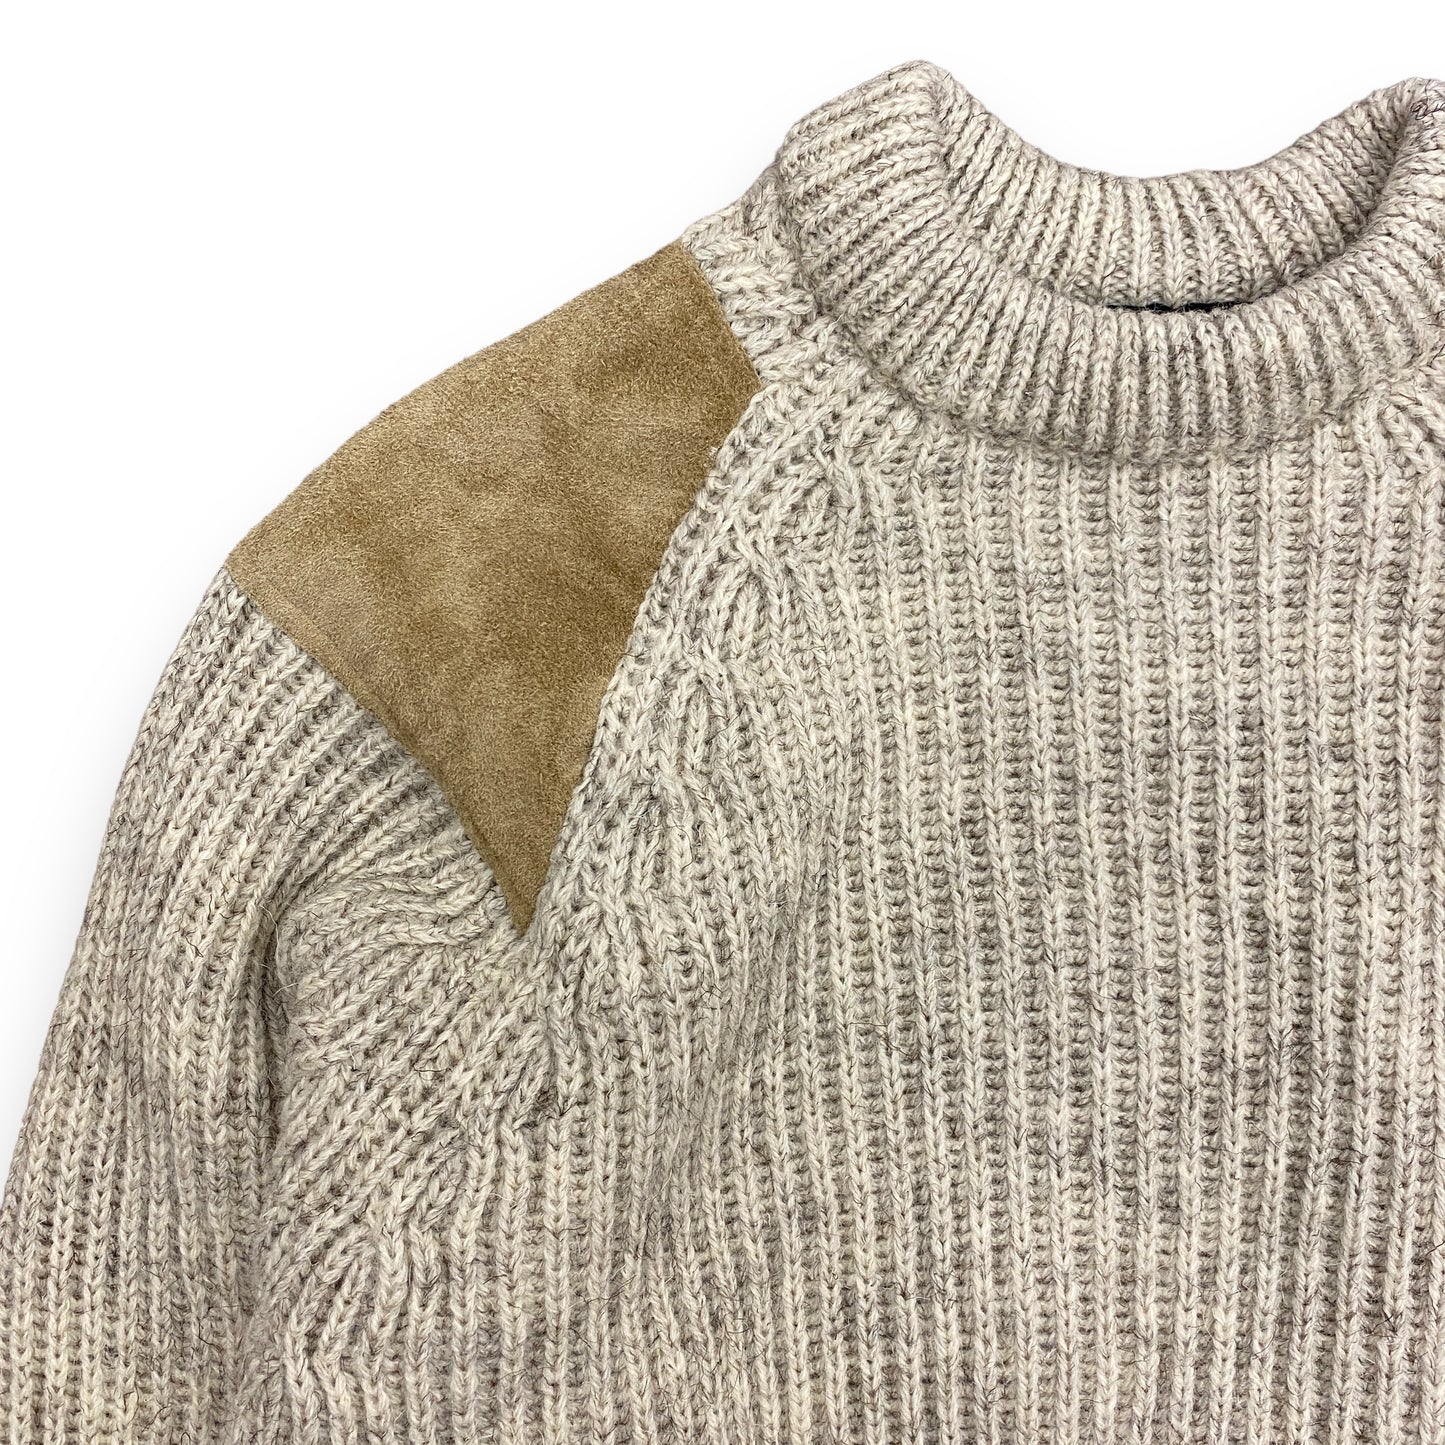 1980s Woolyback British Knitwear Wool & Suede Sweater - Size Large